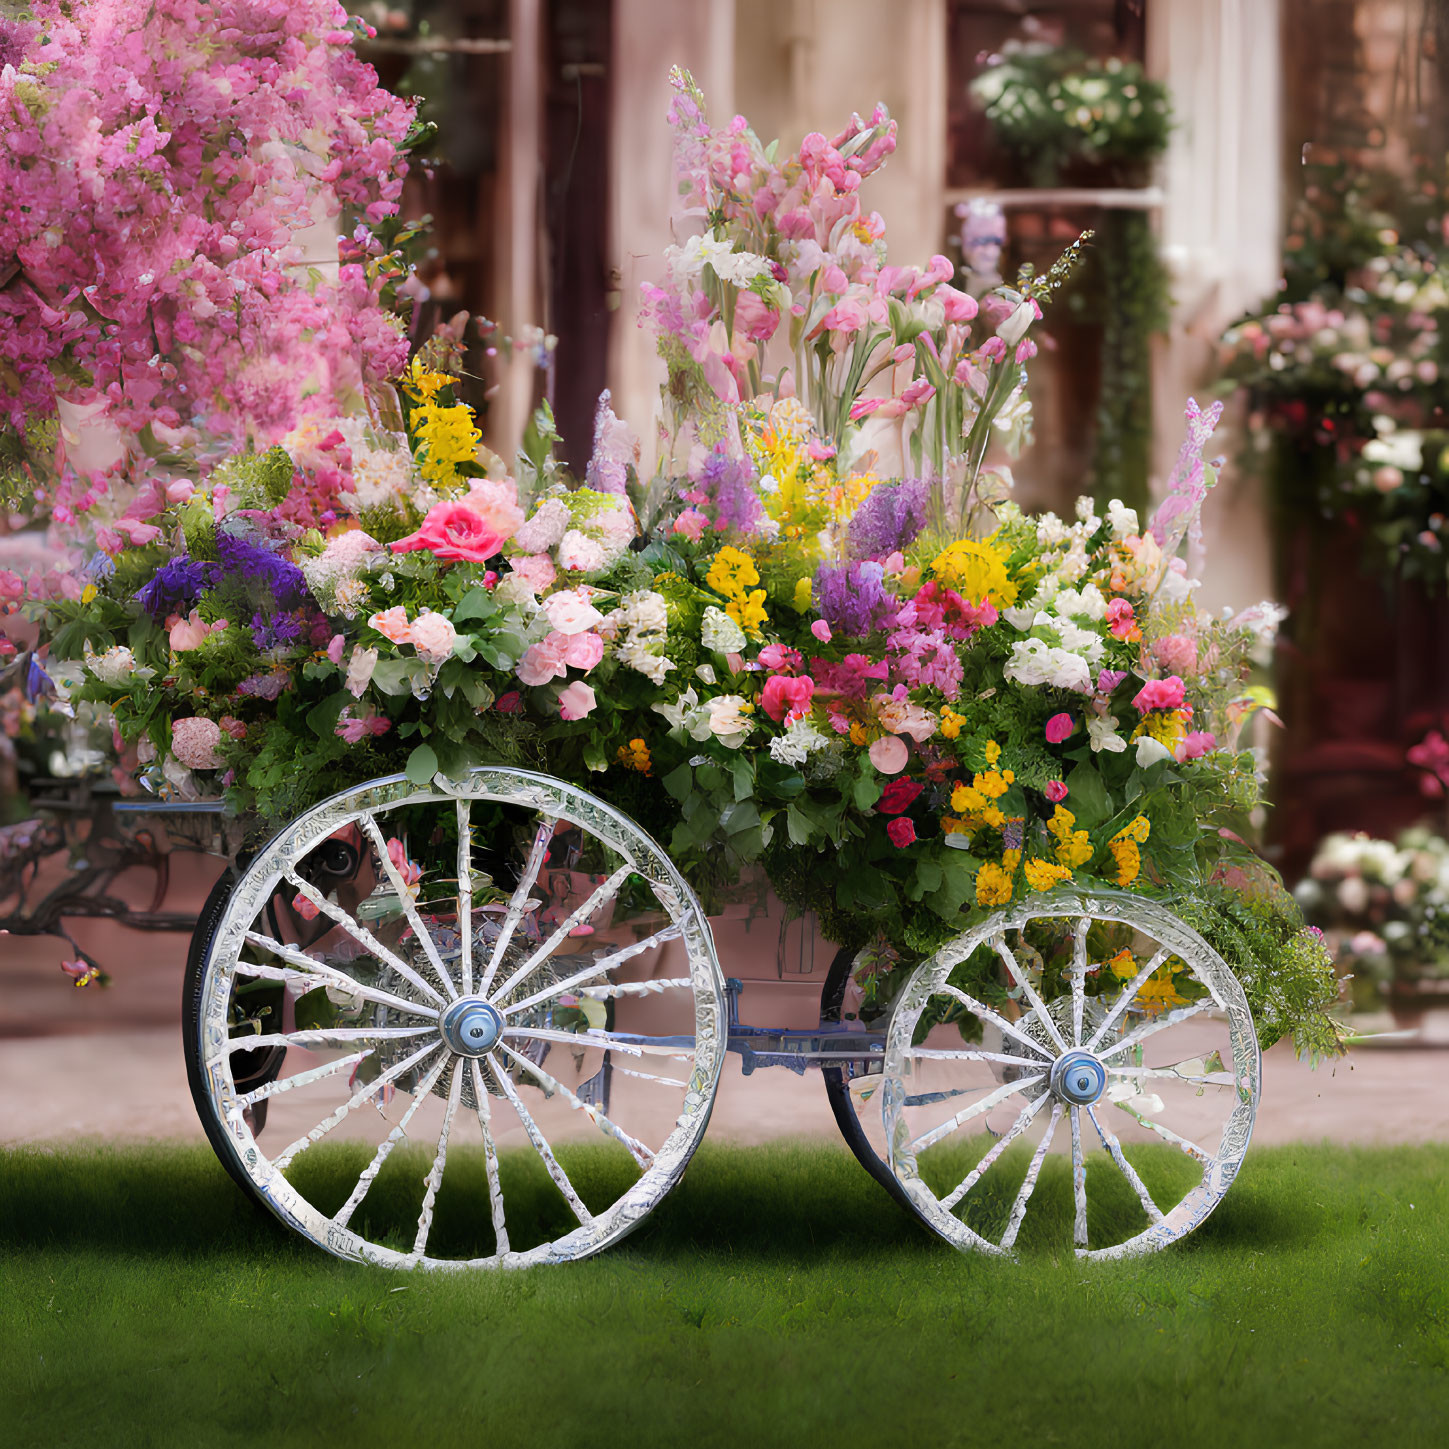 Assorted flowers overflowing from ornate white cart against pink blooms and elegant building